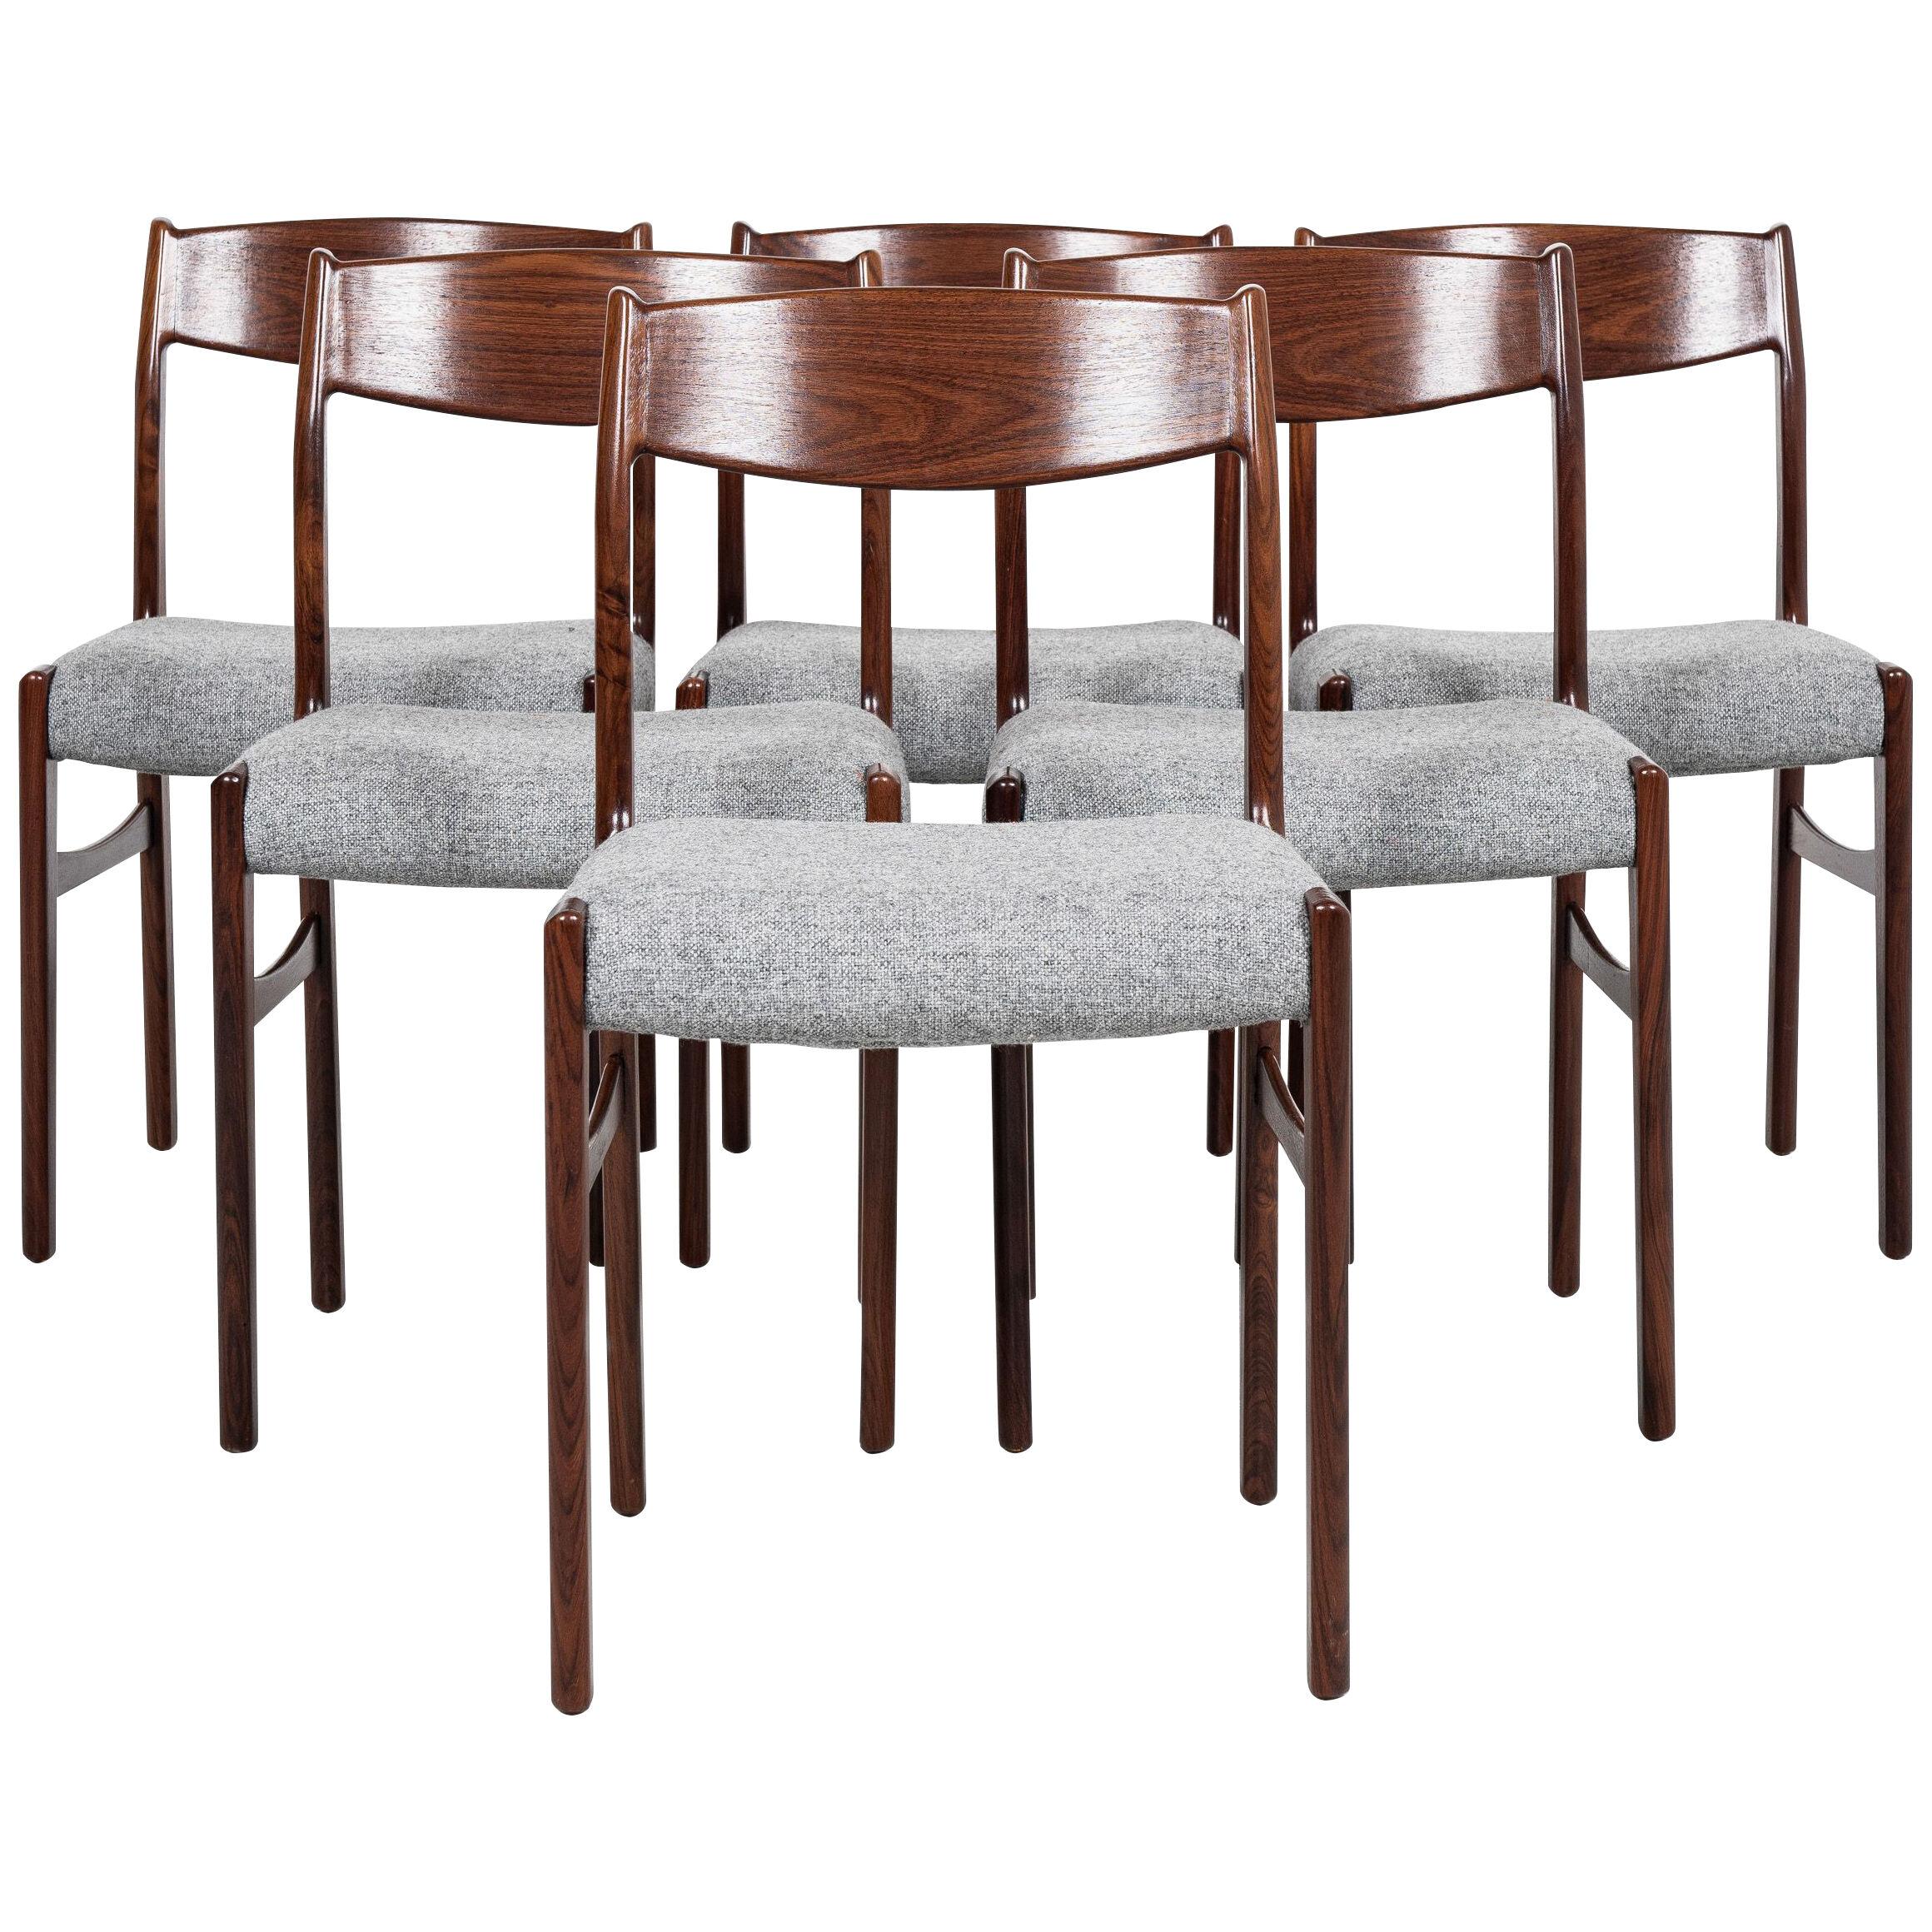 Midcentury Danish set of 6 dining chairs in rosewood by Glyngøre Stolefabrik